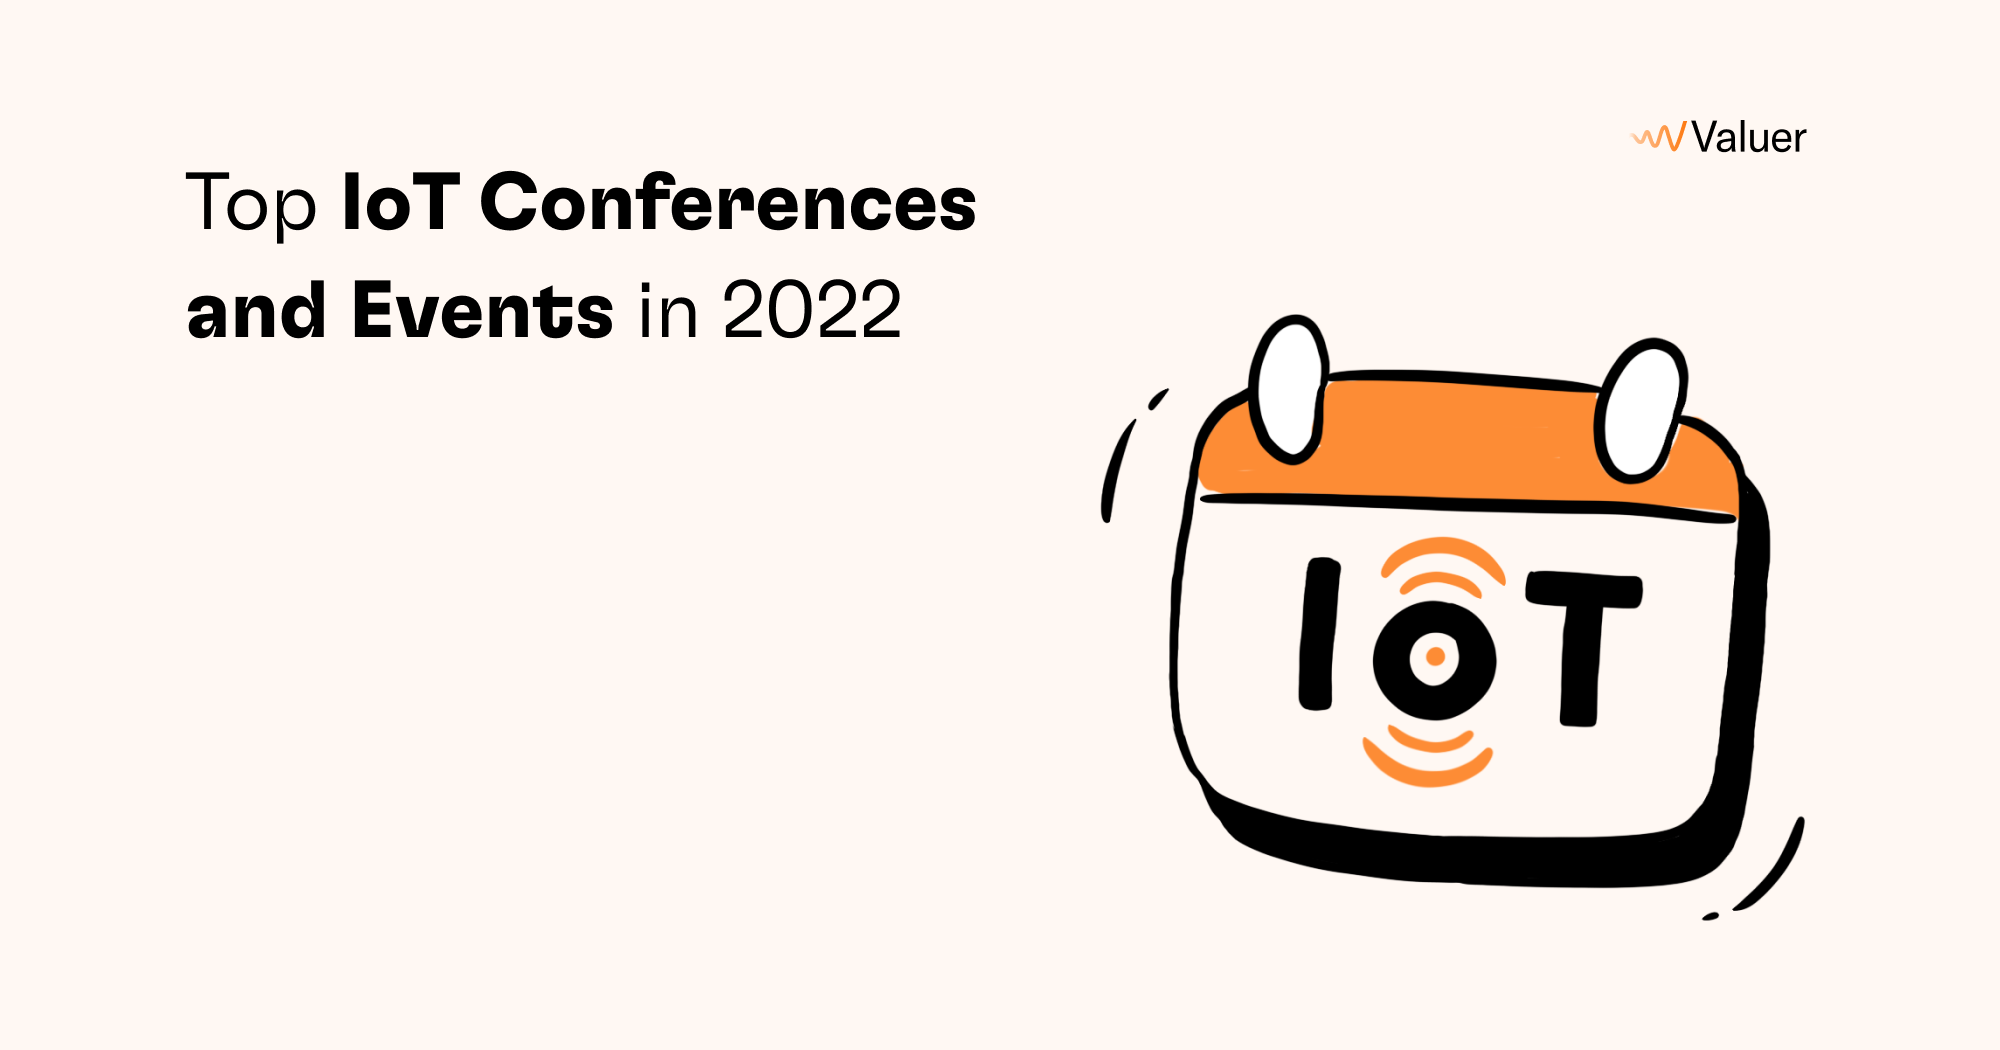 Top IoT Conferences and Events in 2022